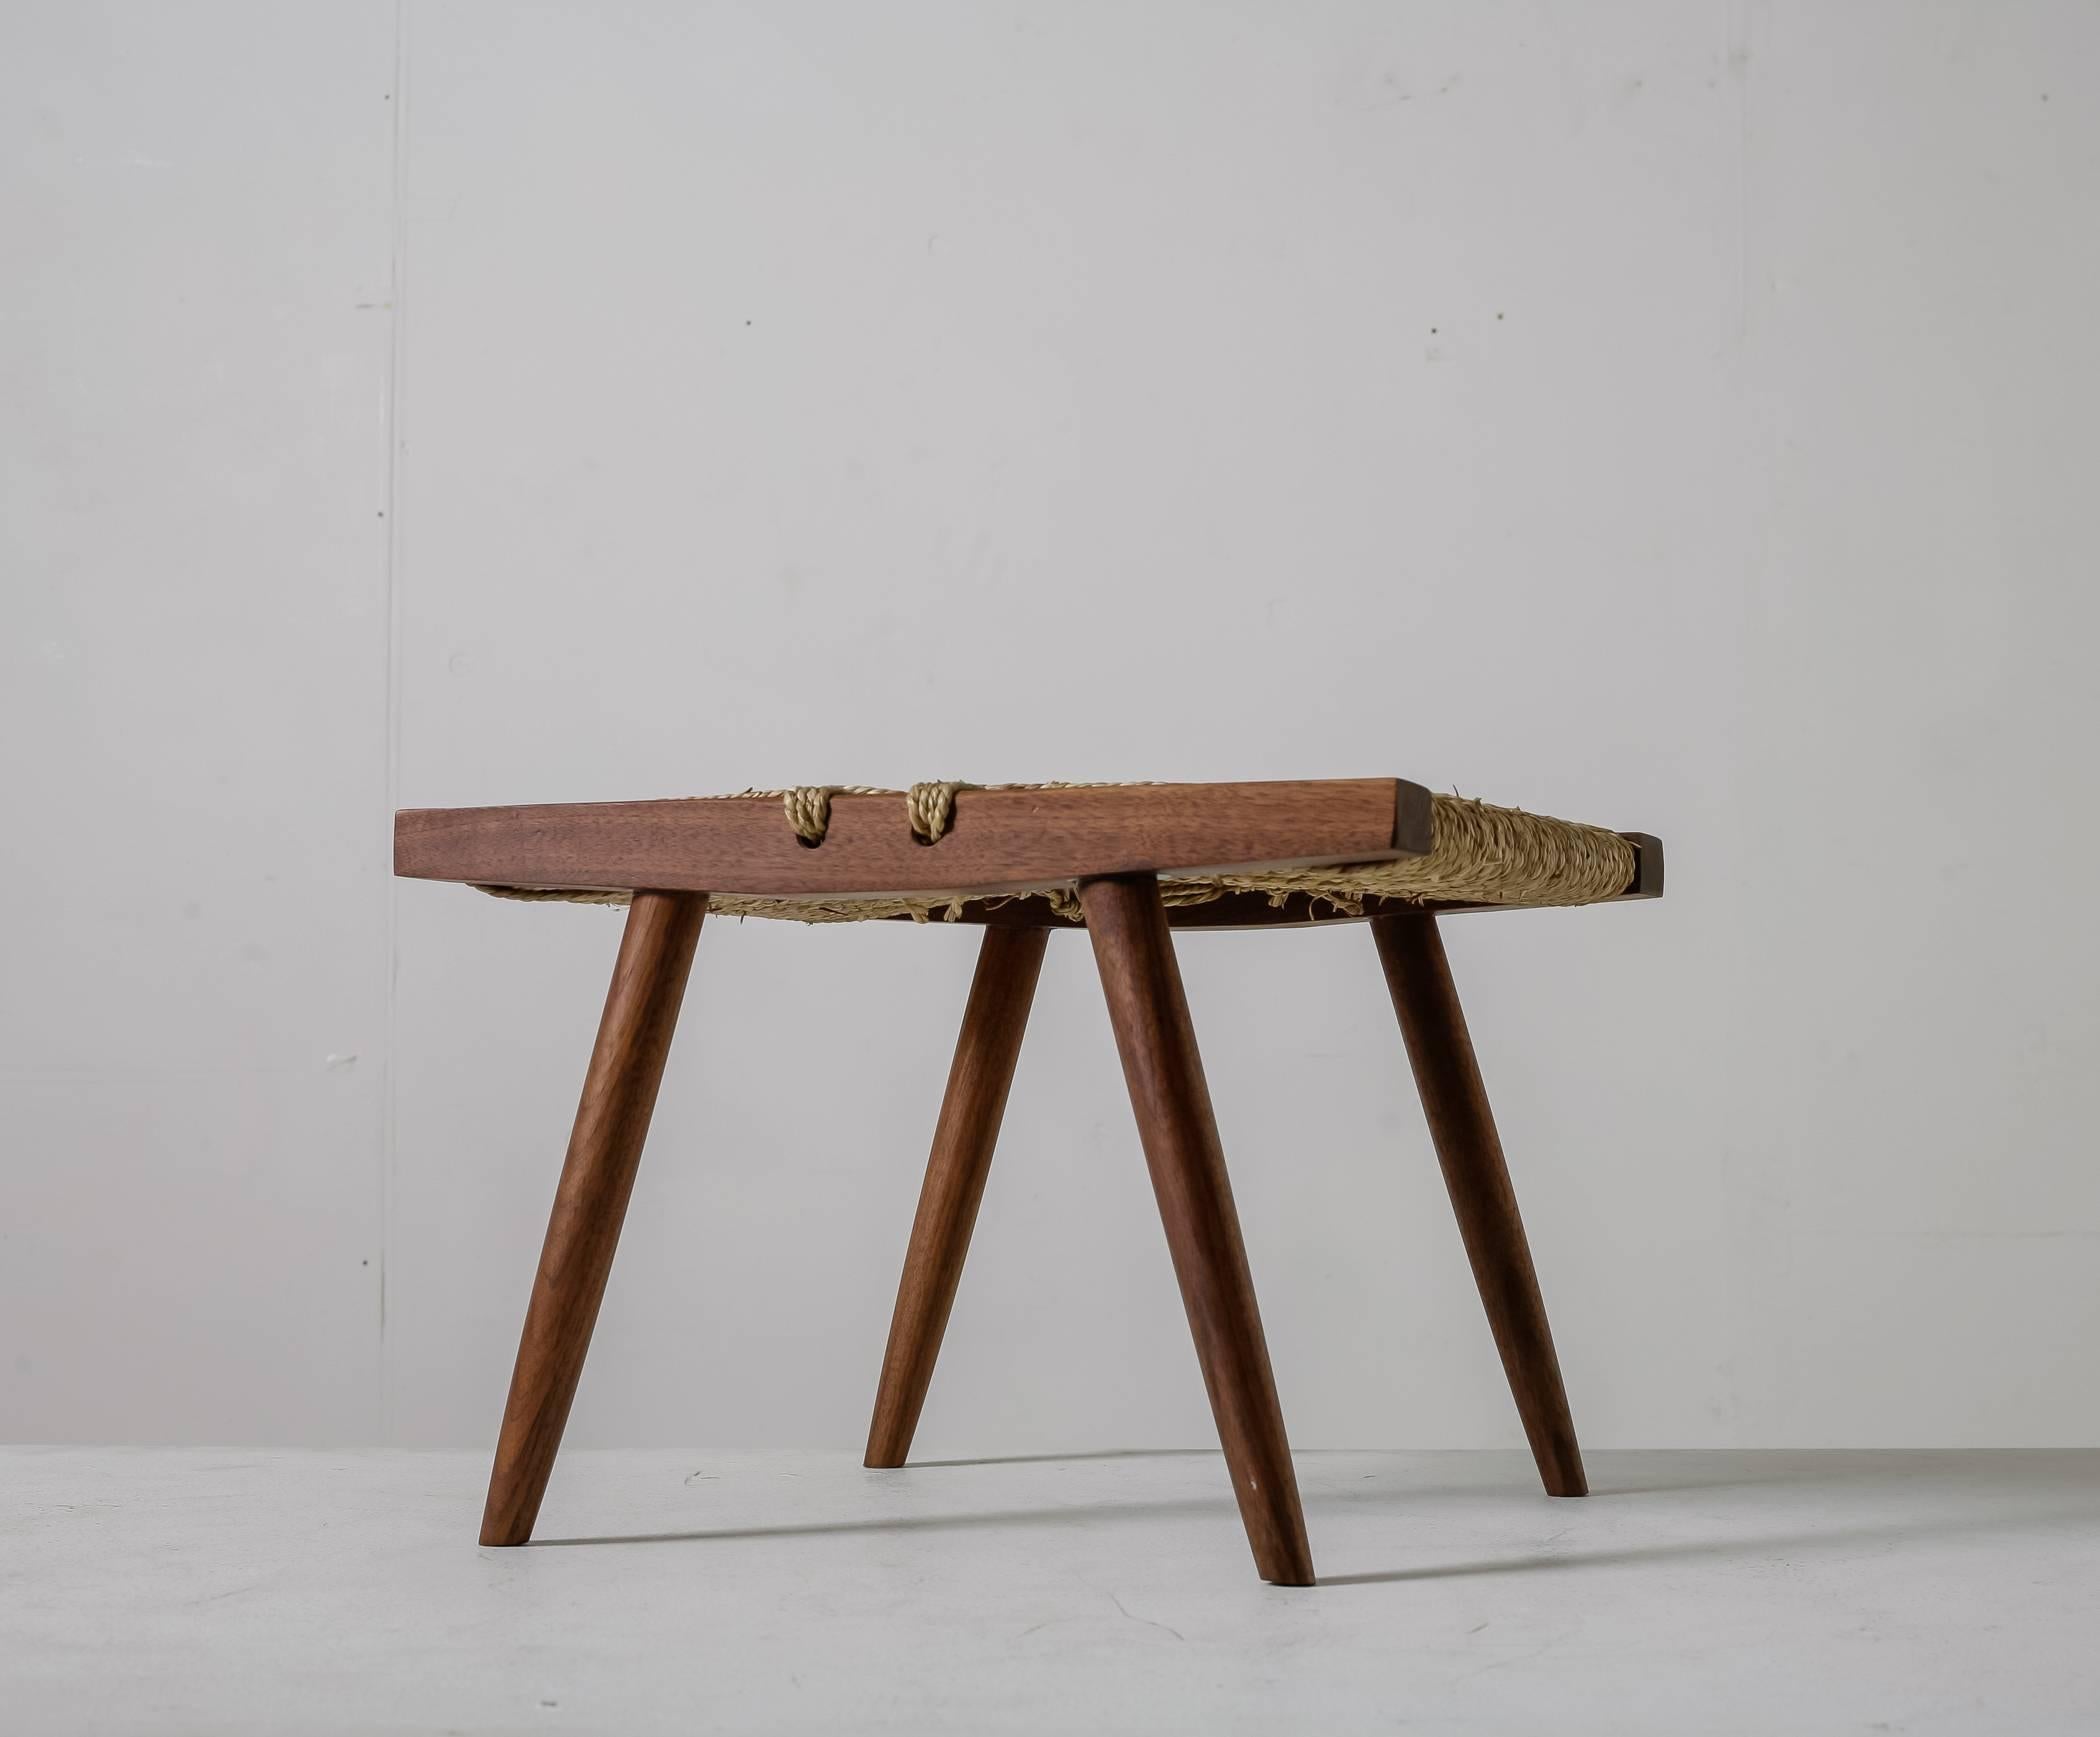 A George Nakashima stool made of a walnut frame with a grass rope seating. This rectangular stool stands on four tapering legs and is in a very good condition.